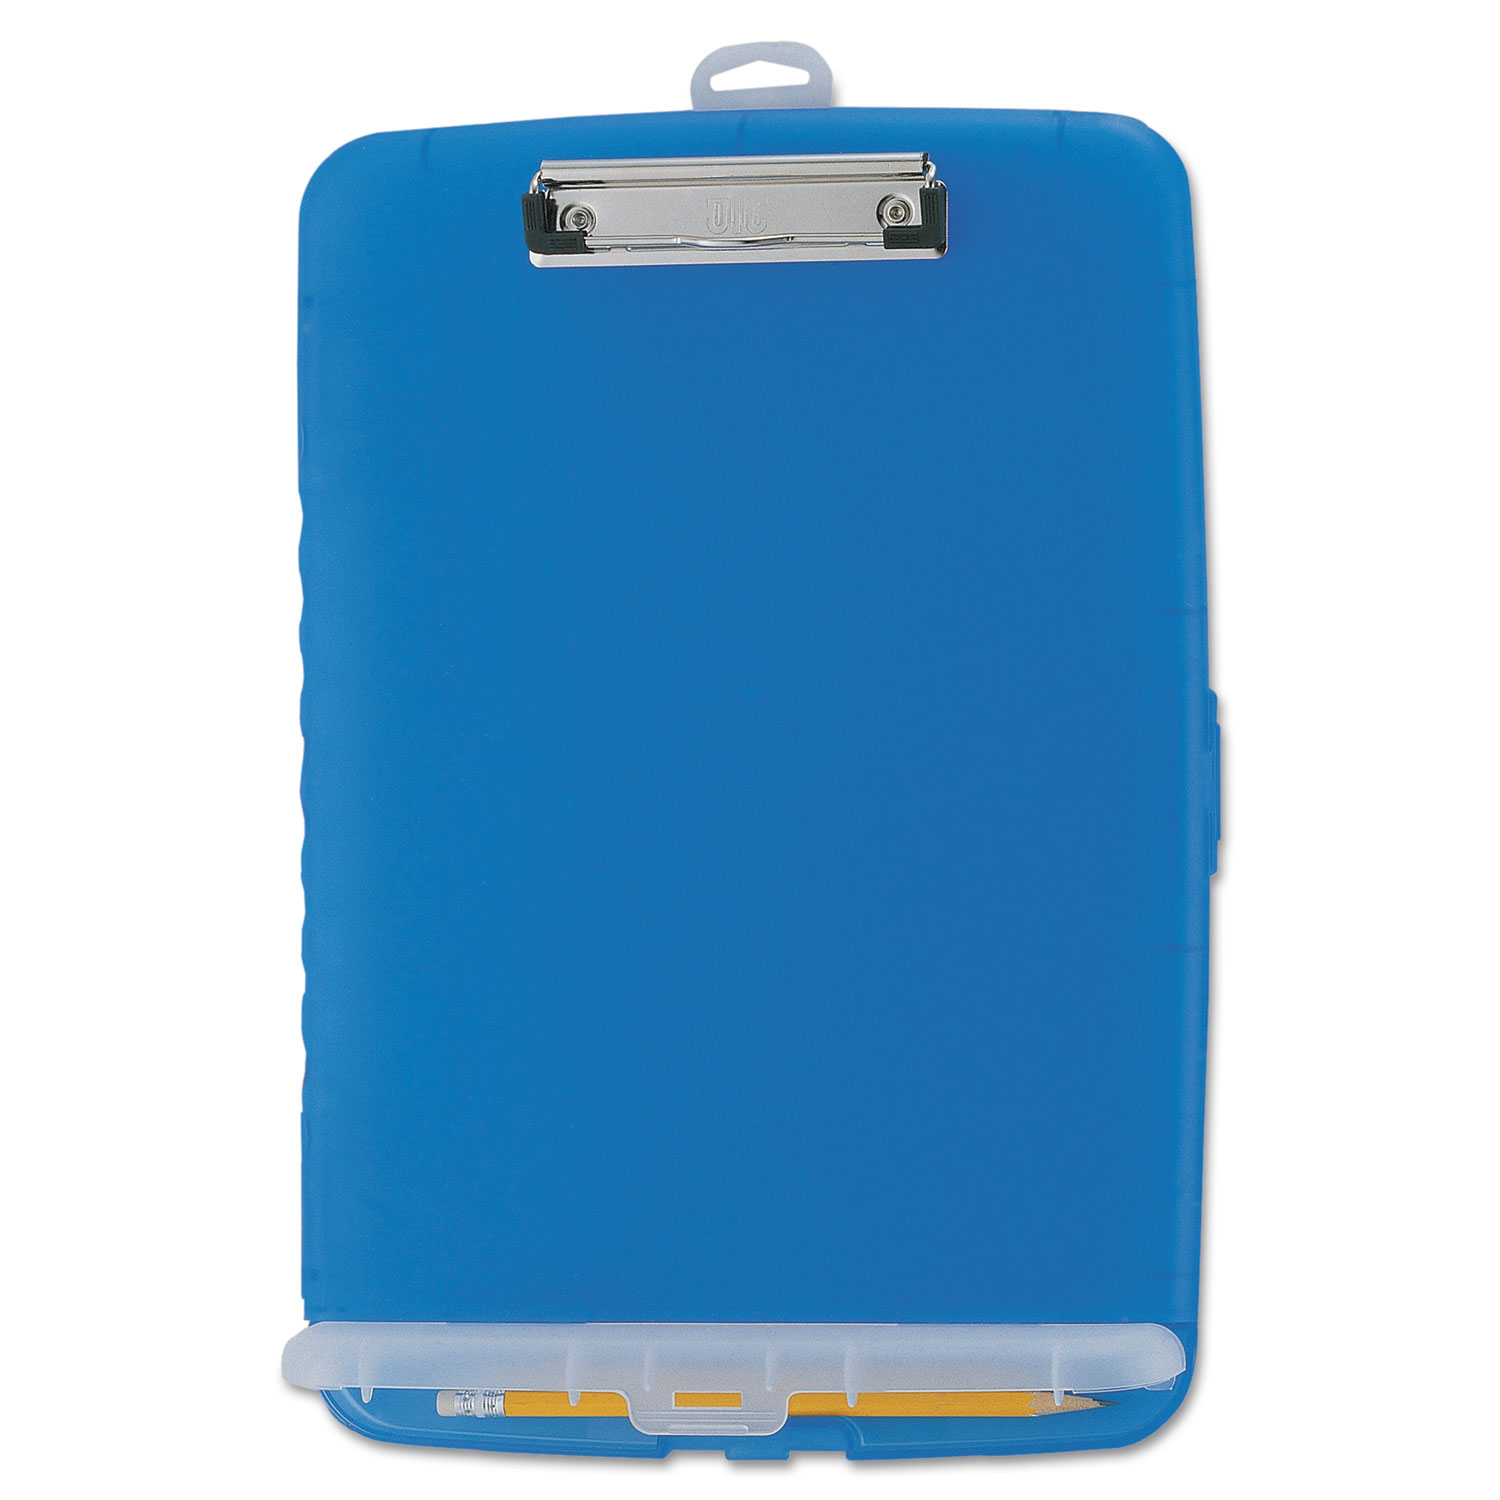 Low Profile Storage Clipboard, 1/2 Capacity, Holds 8 1/2 x 11, Translucent Blue